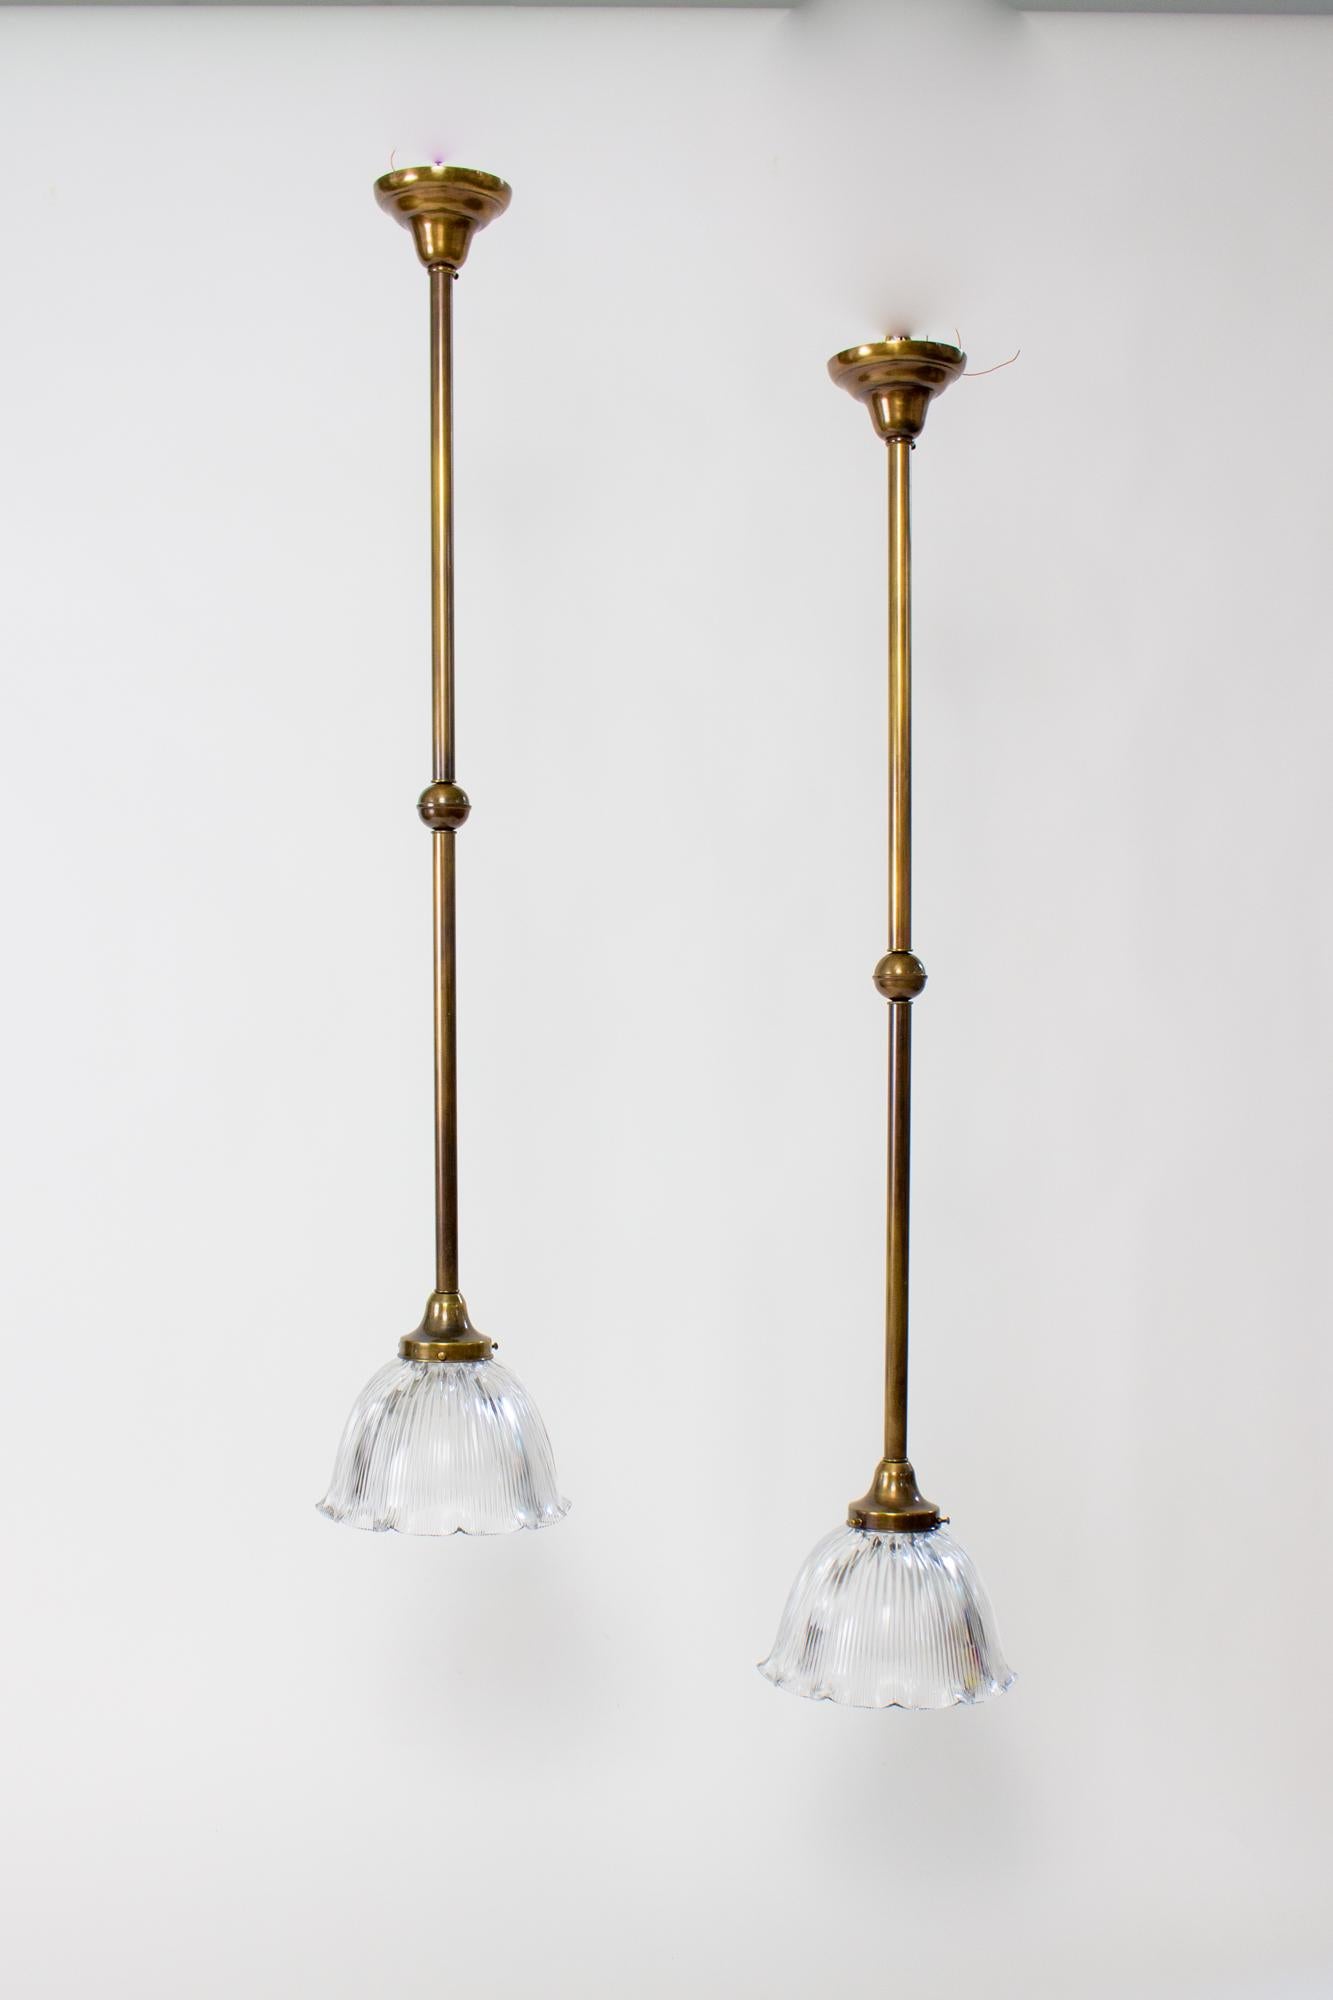 Long antique brass pendant with prismatic glass, a pair, 49” long. This pair of traditional pole pedants are made from a solid brass with an antique patina. They have a bell shaped canopy, long tube, with a spherical break in the middle, and a